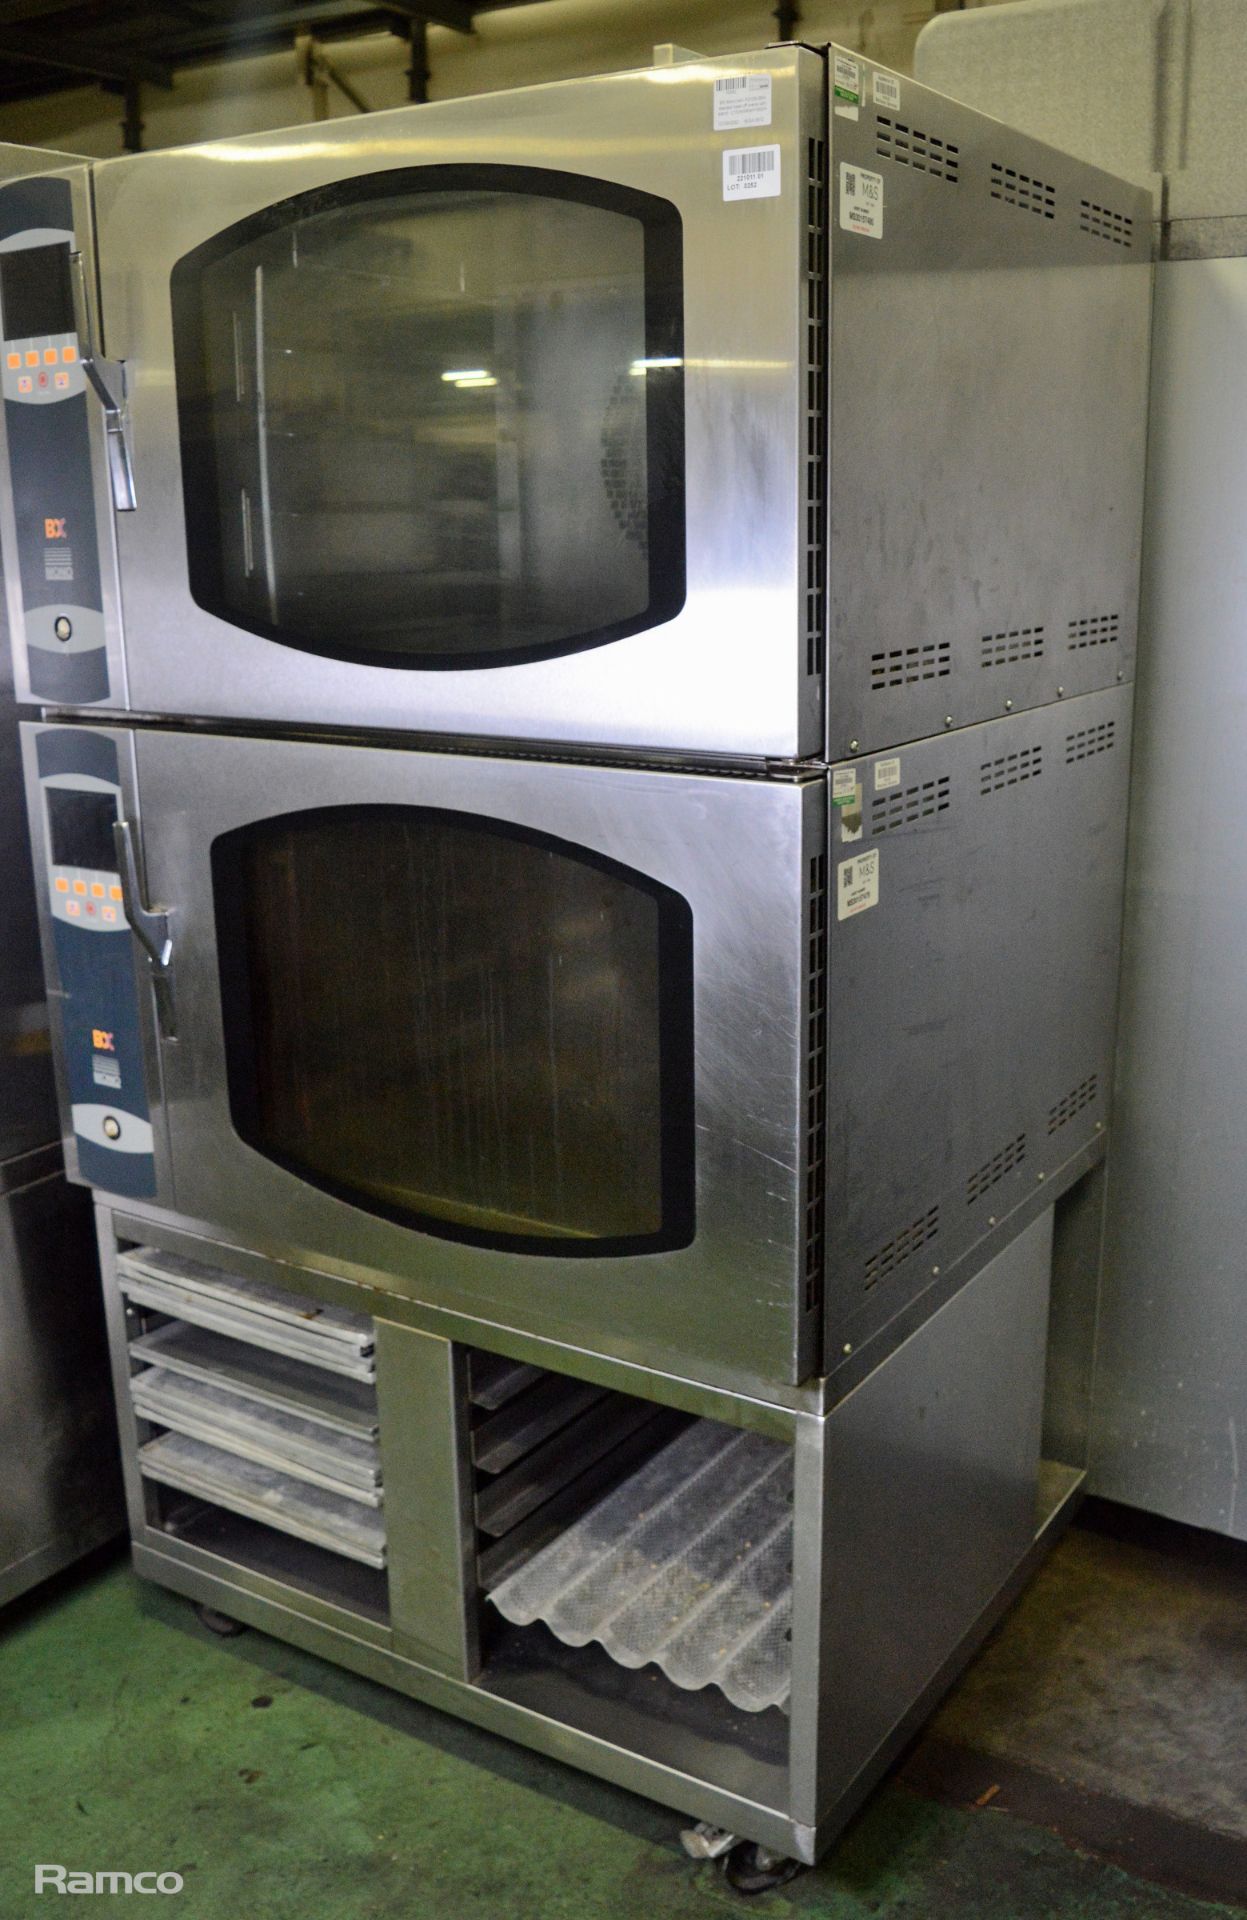 Mono BX twin FG158-B54 stacked bake off ovens with stand - L100xW90xH180cm - Image 12 of 12